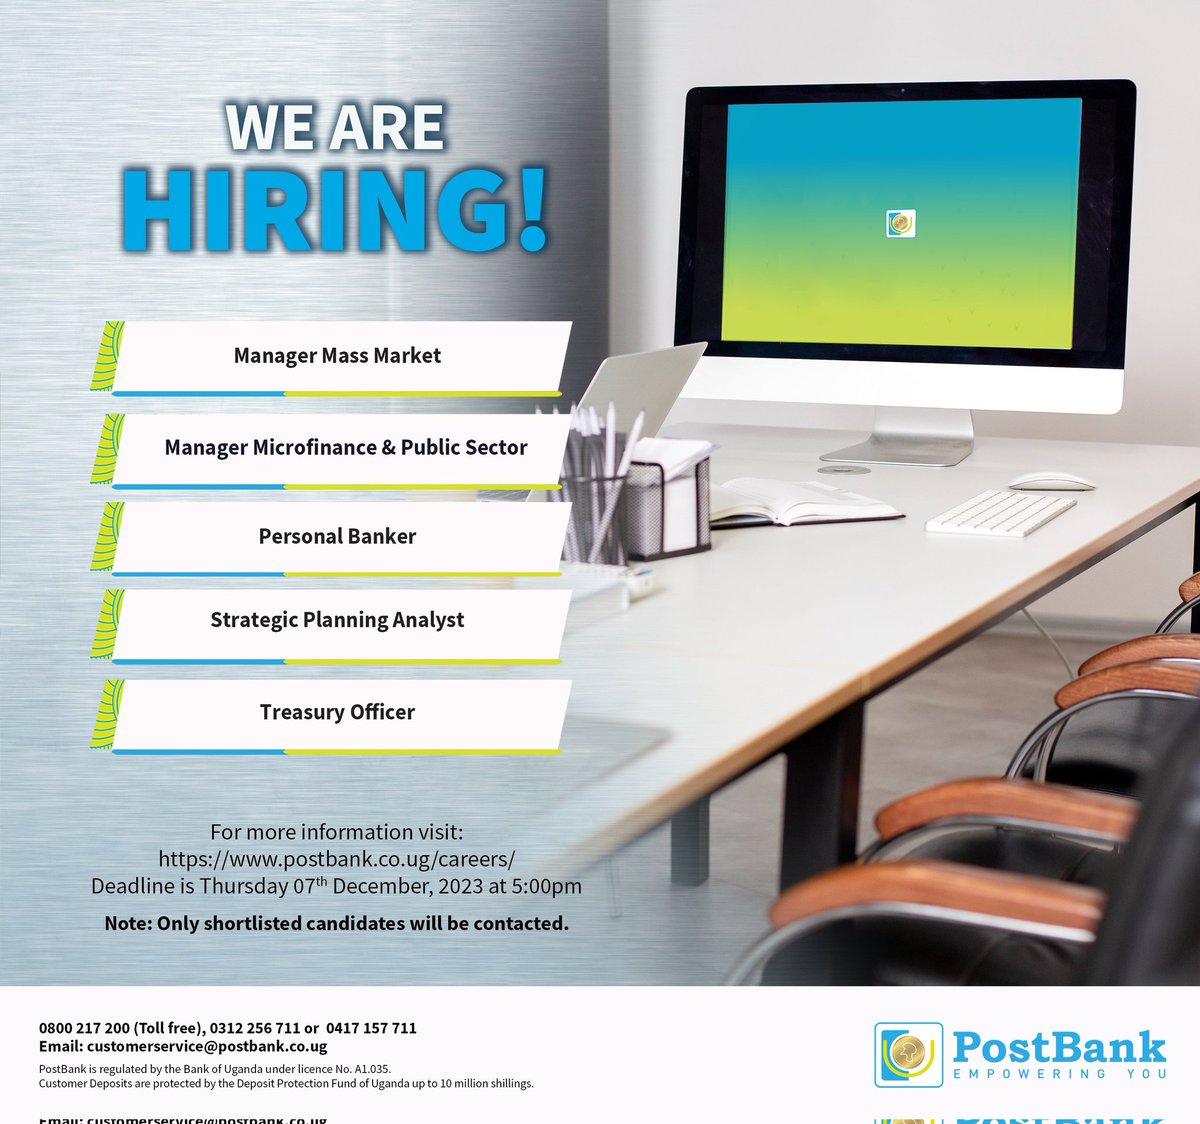 Just 1 day left 🗓
Several job opportunities are available at @postbankug. Kick off your career resolutions in rhythm!

Visit bit.ly/3r5uA1R for more details

#jobclinicug #jobsinuganda #ApplyNow #HiringNow #jobopportunity #bankjobs